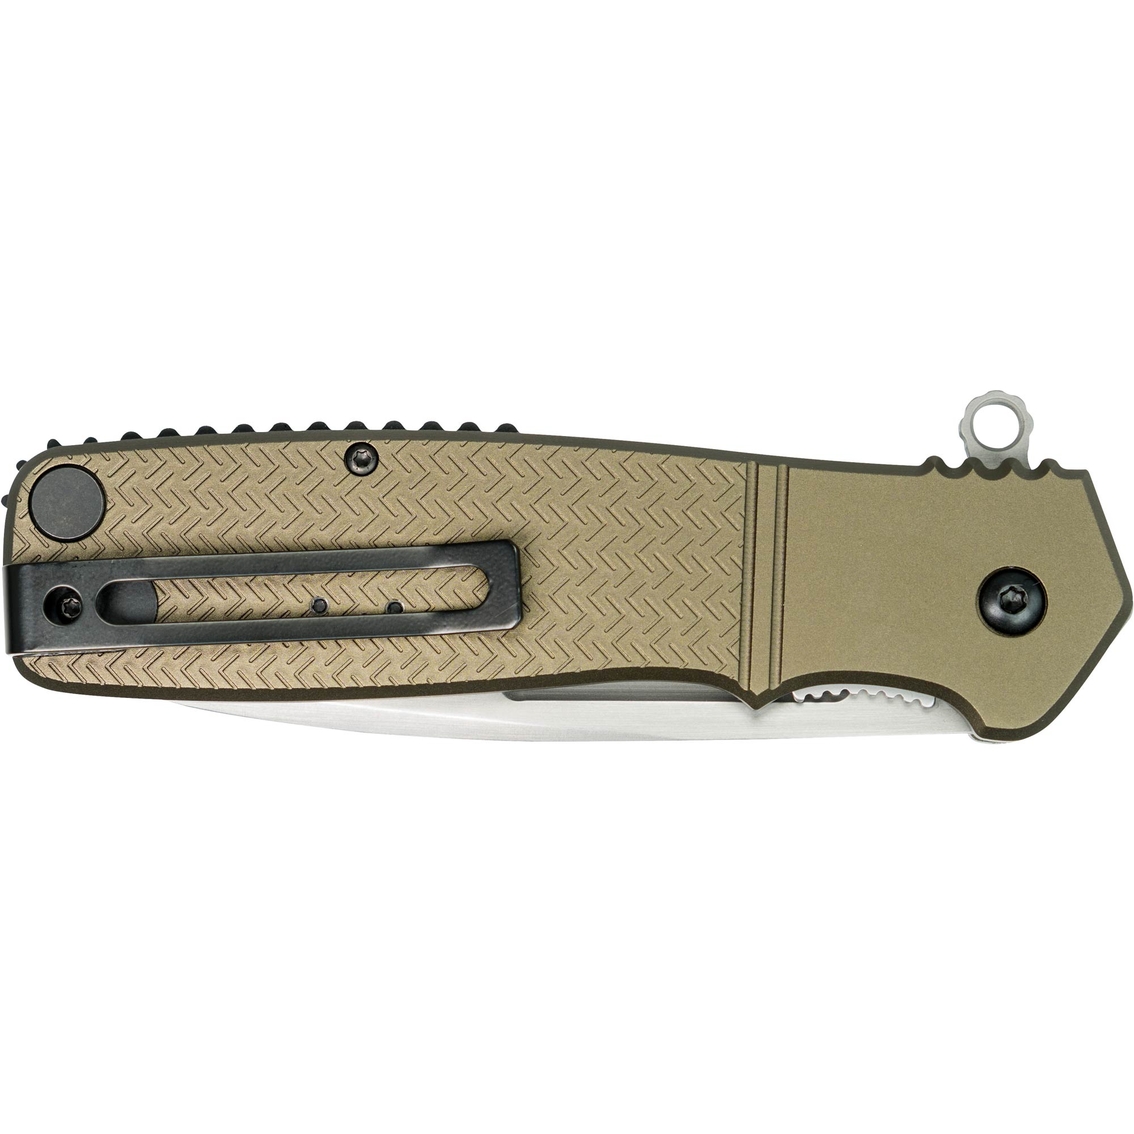 Columbia River Knife & Tool Homefront Clip Folder Knife, Field Strip Technology - Image 2 of 4